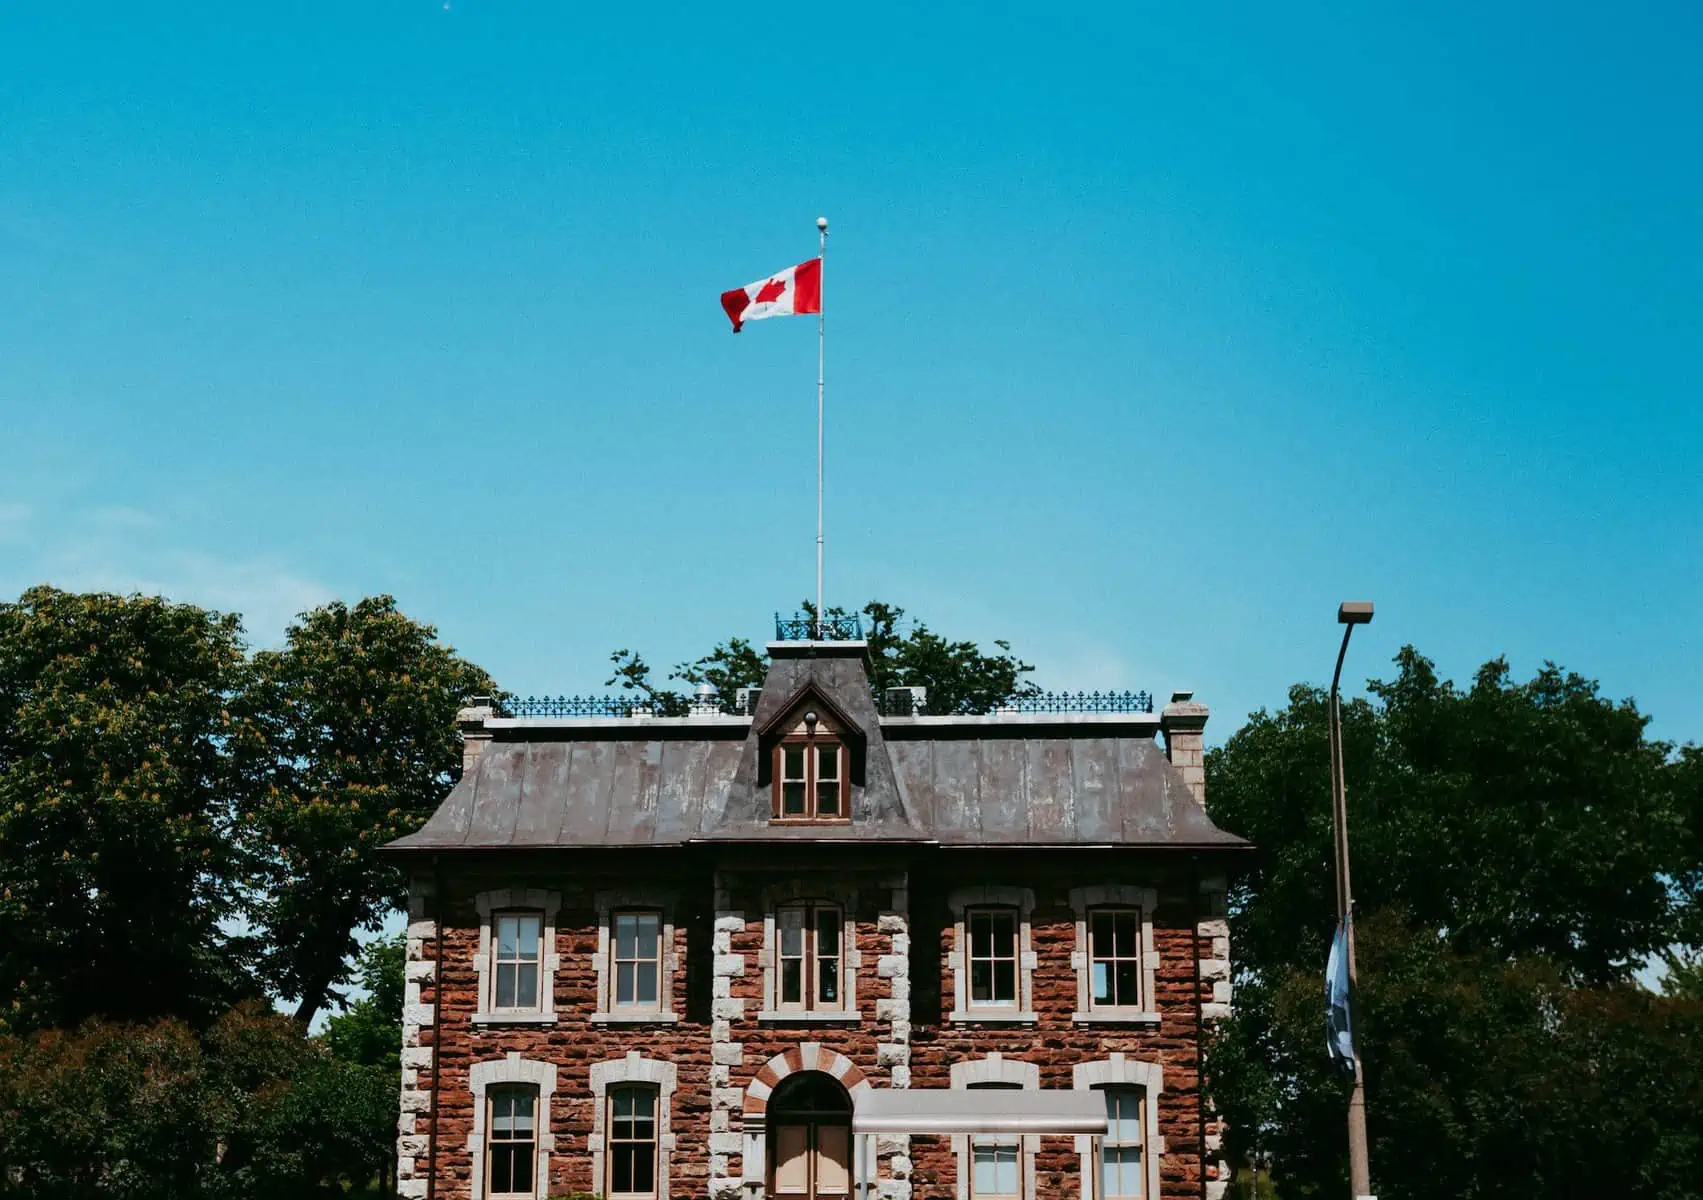 Historic home in Sault Ste Marie with the Canada flag